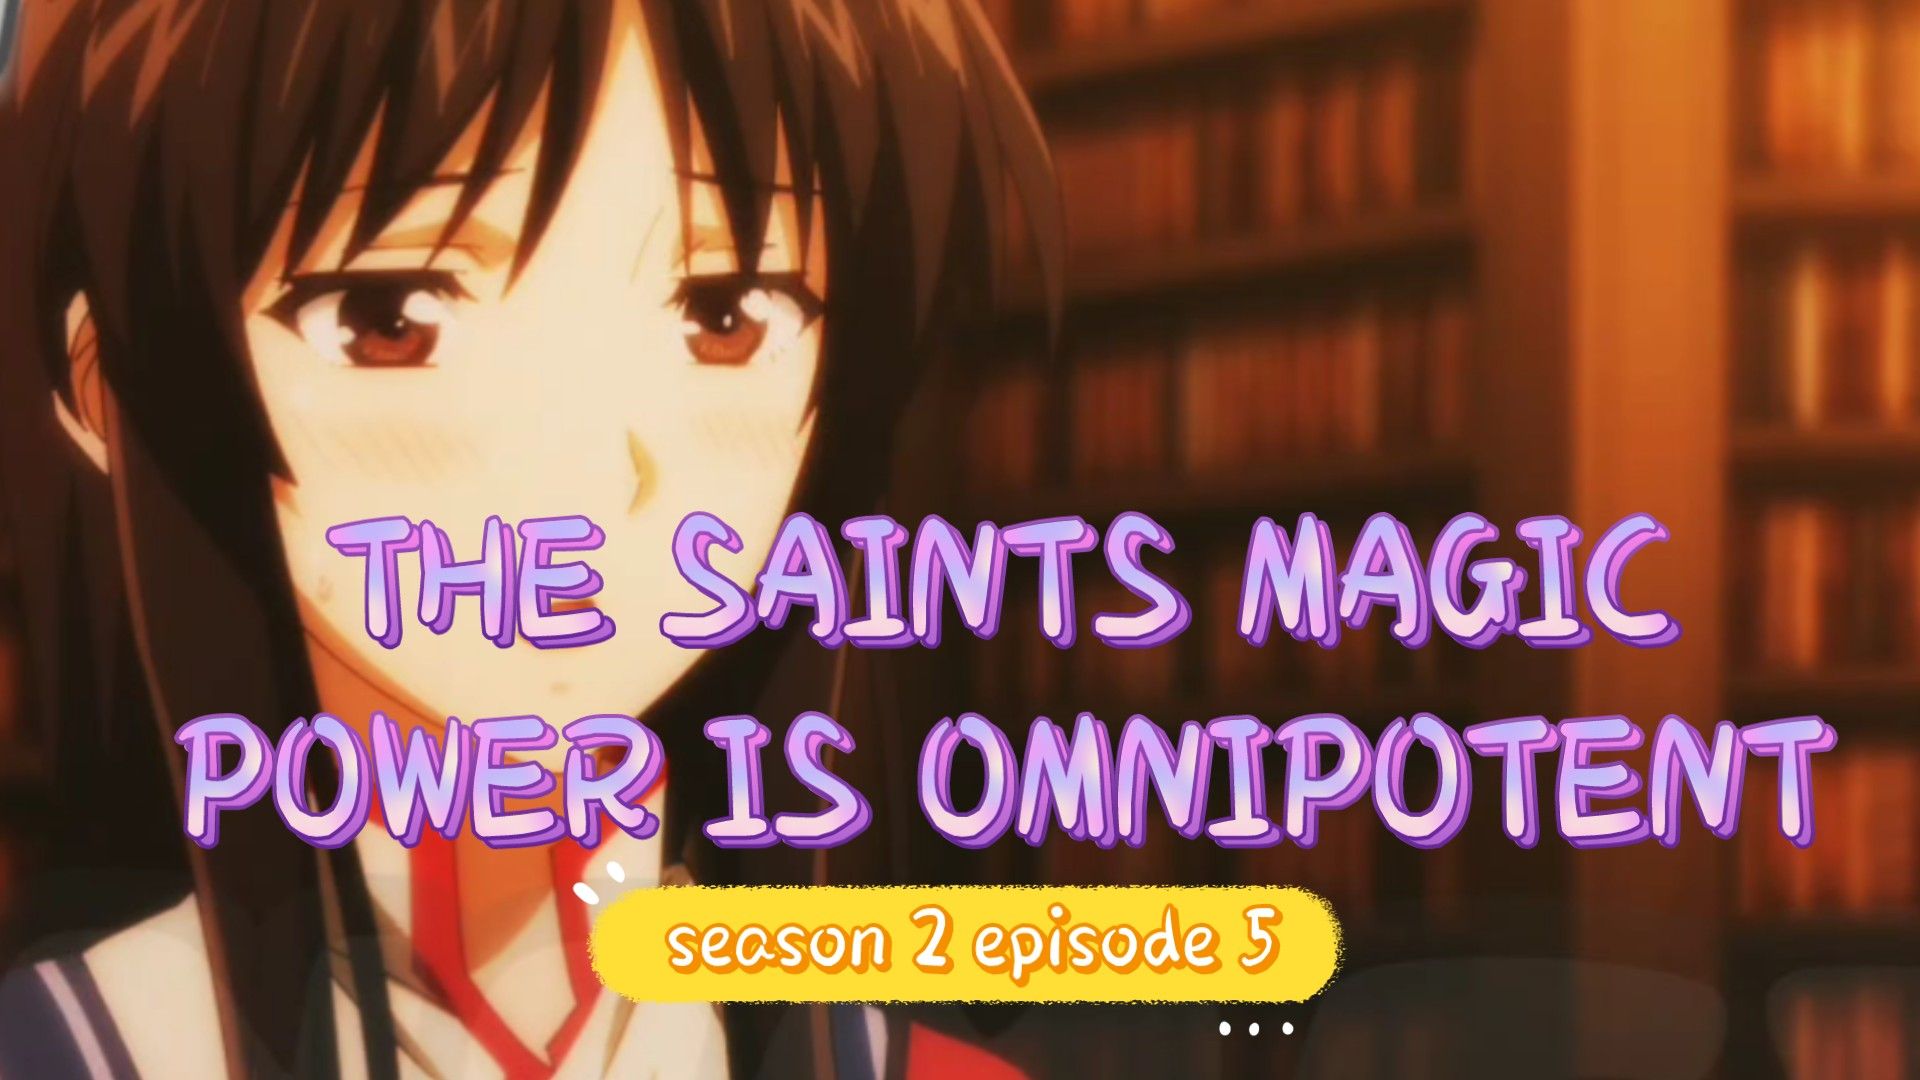 The Saint's Magic Power is Omnipotent Season 2 EP07 (Link in the